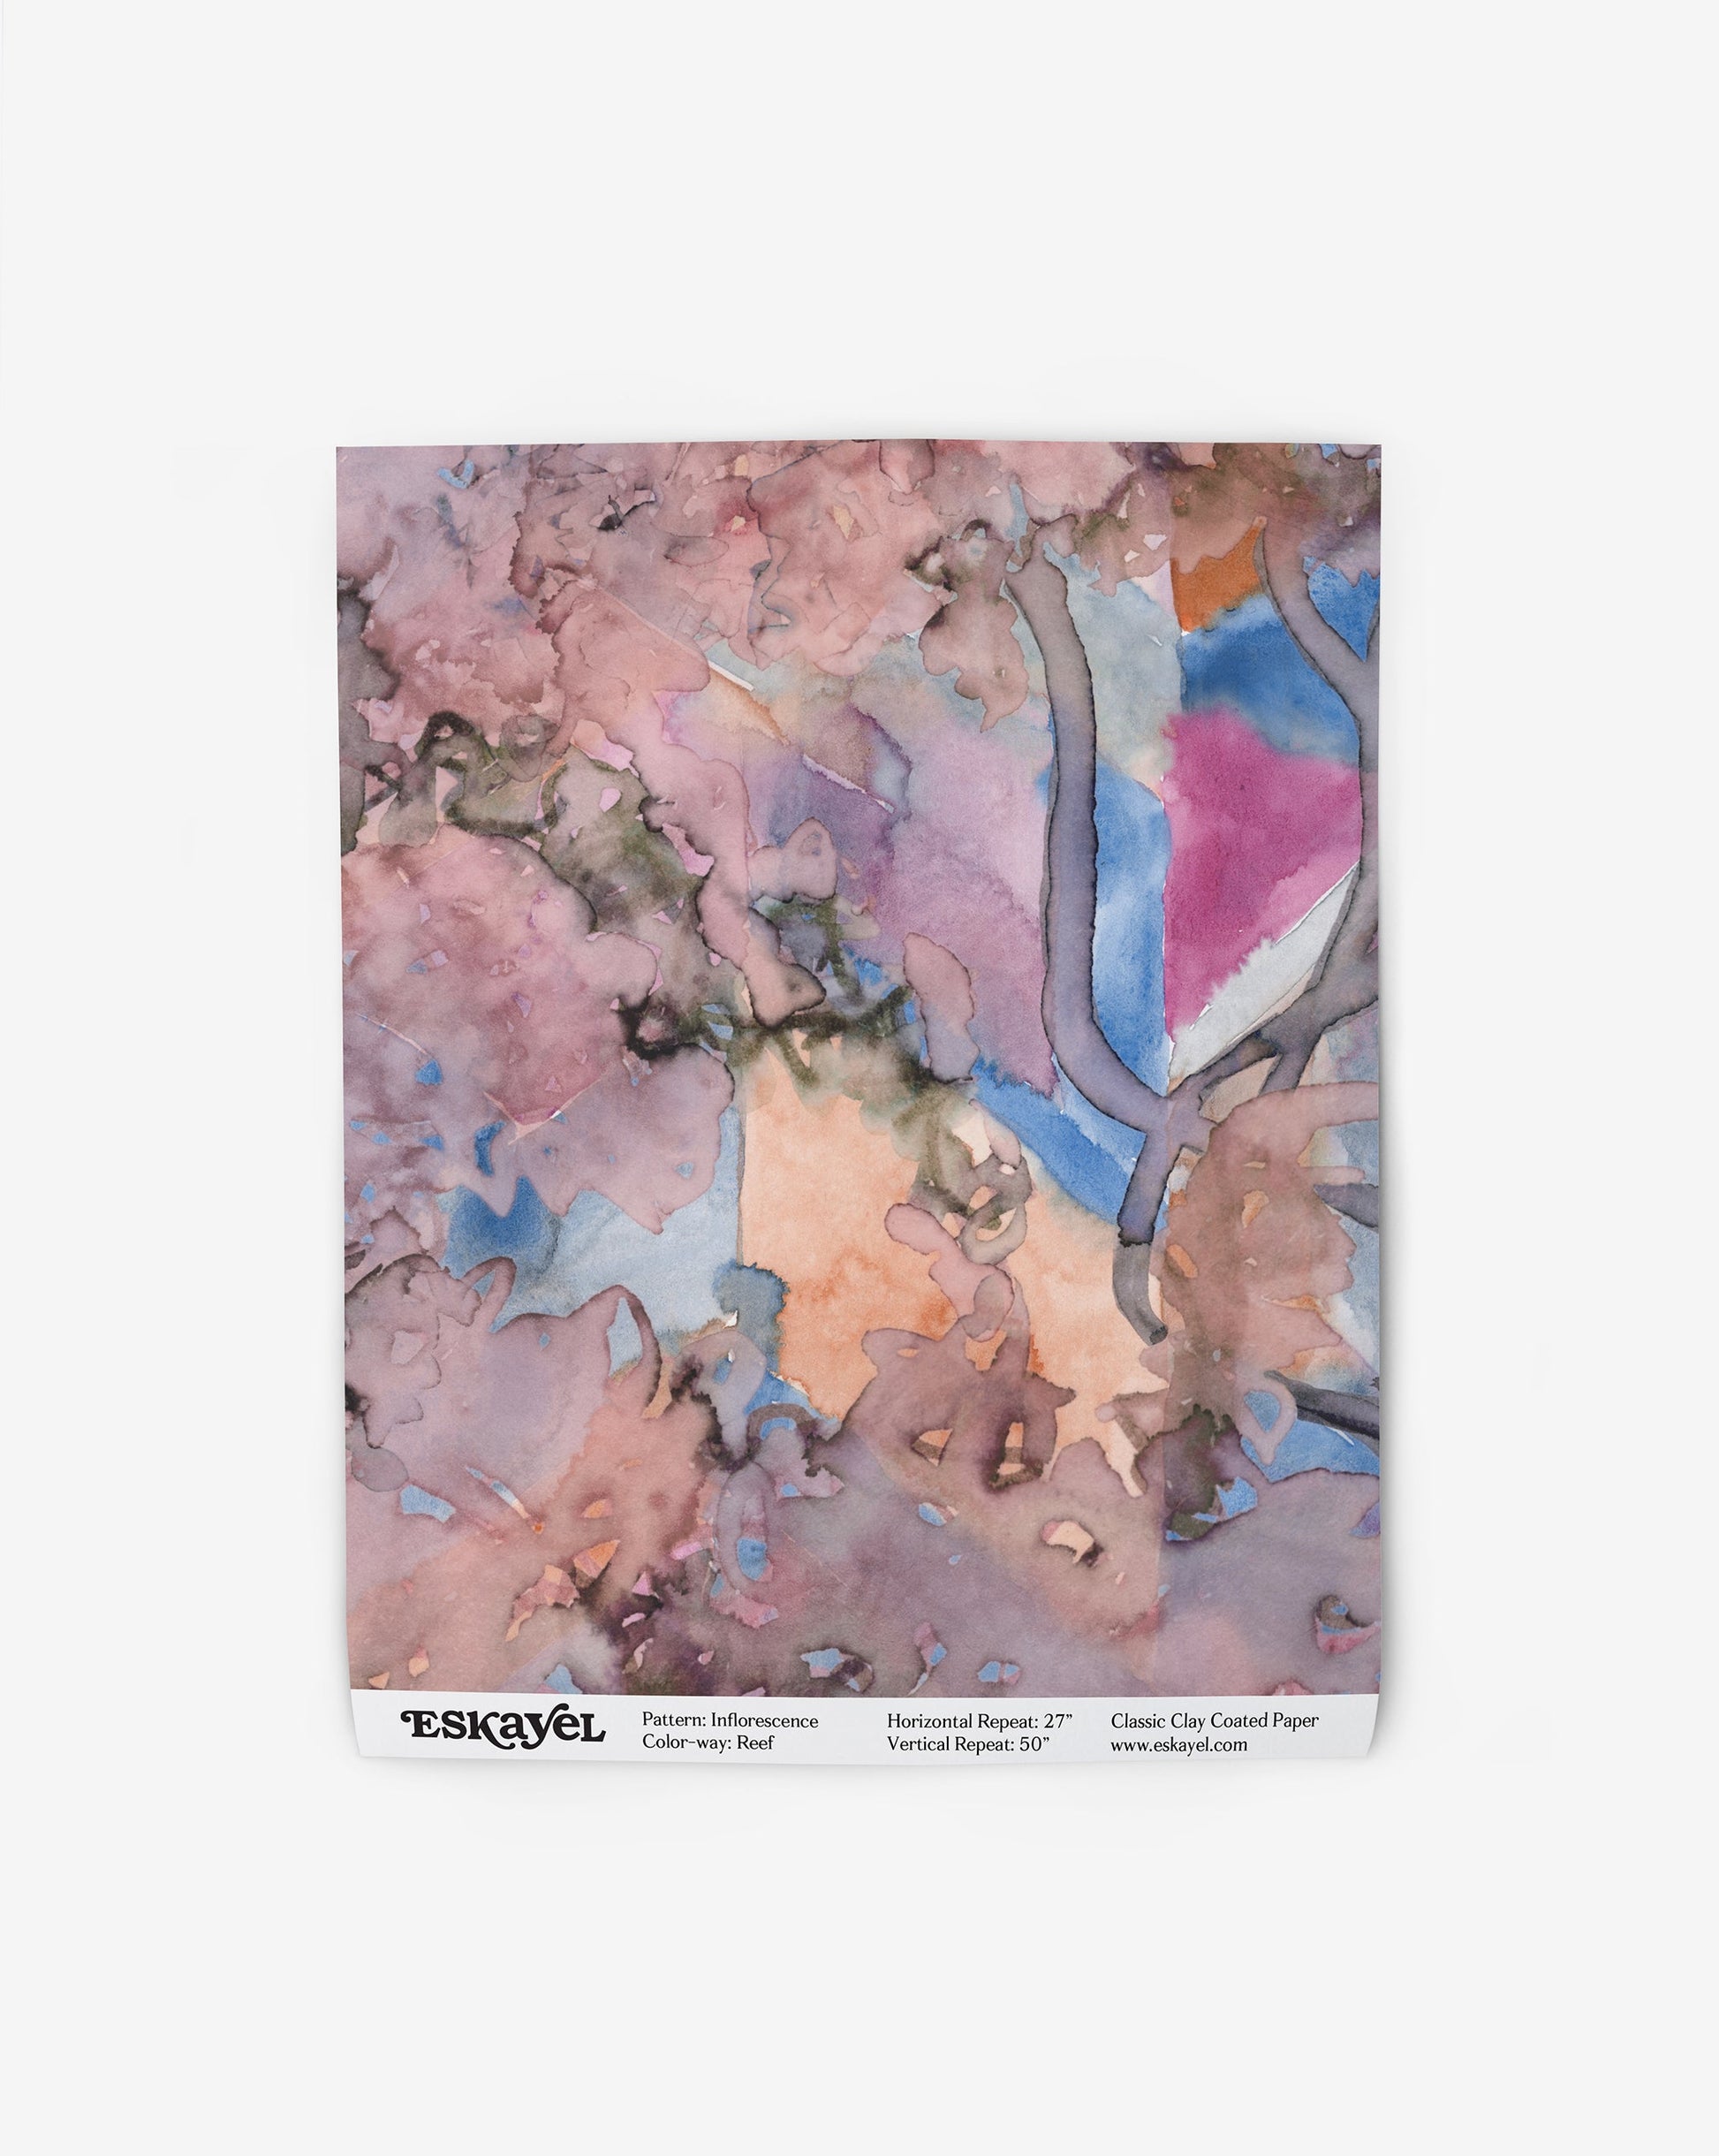 A pink, purple, and blue abstract painting with an Inflorescence Wallpaper Reef design on wallpaper